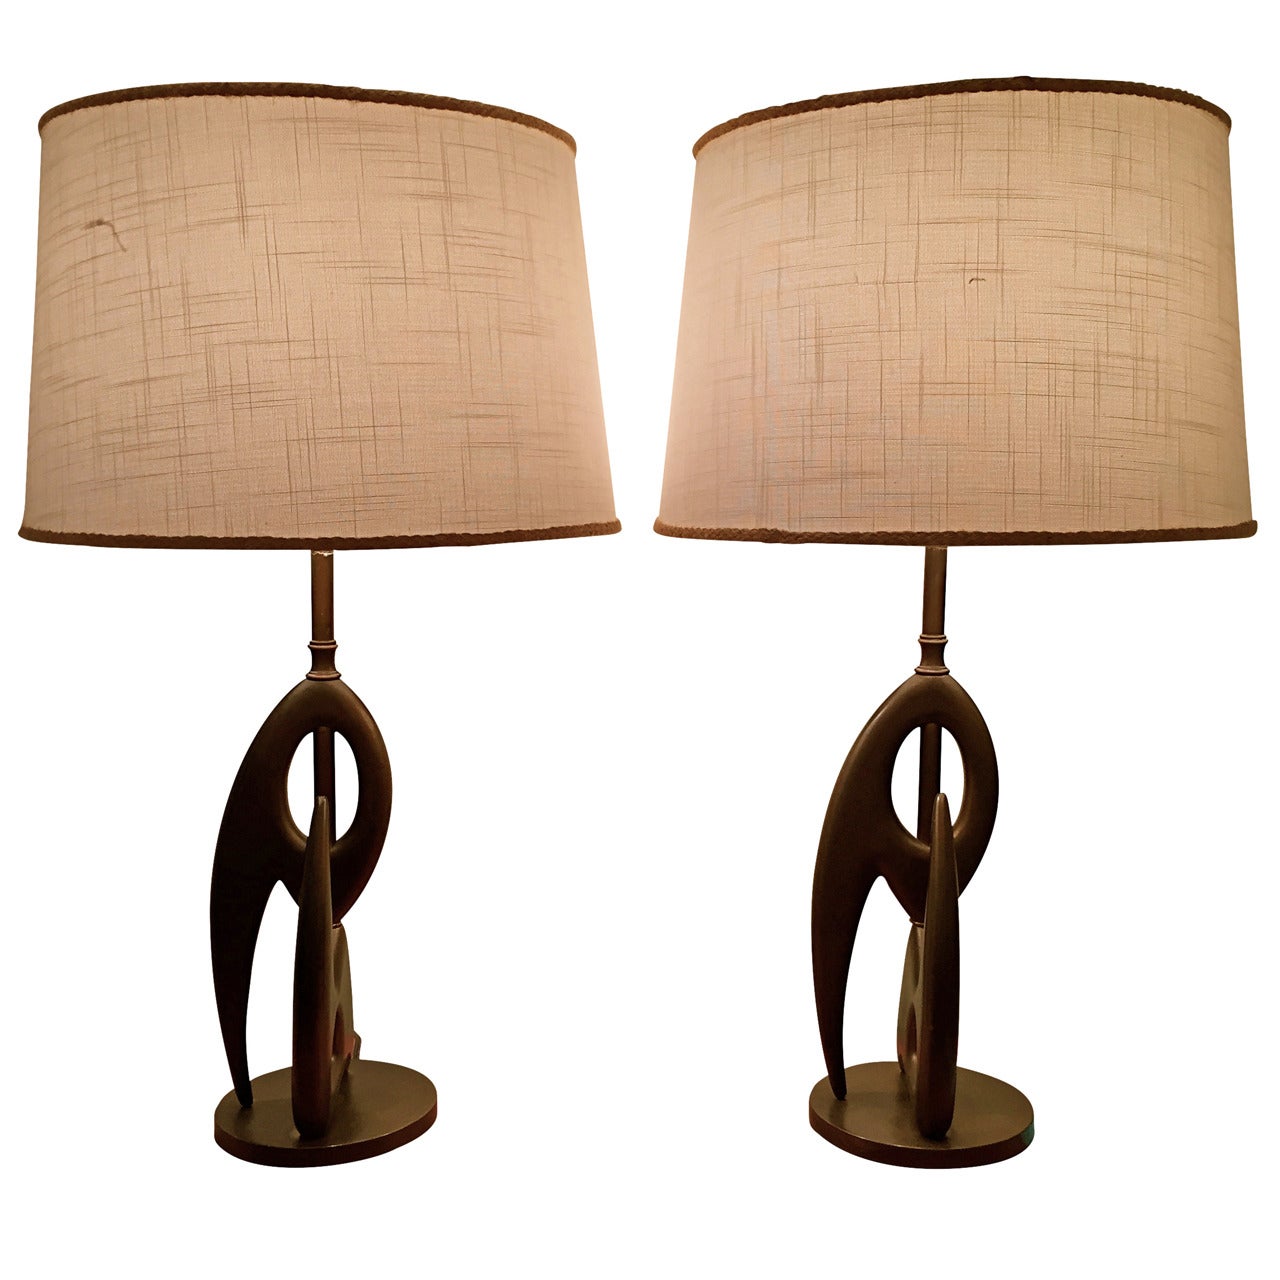 Pair of Biomorphic Sculptural Table Lamps by Rembrandt For Sale